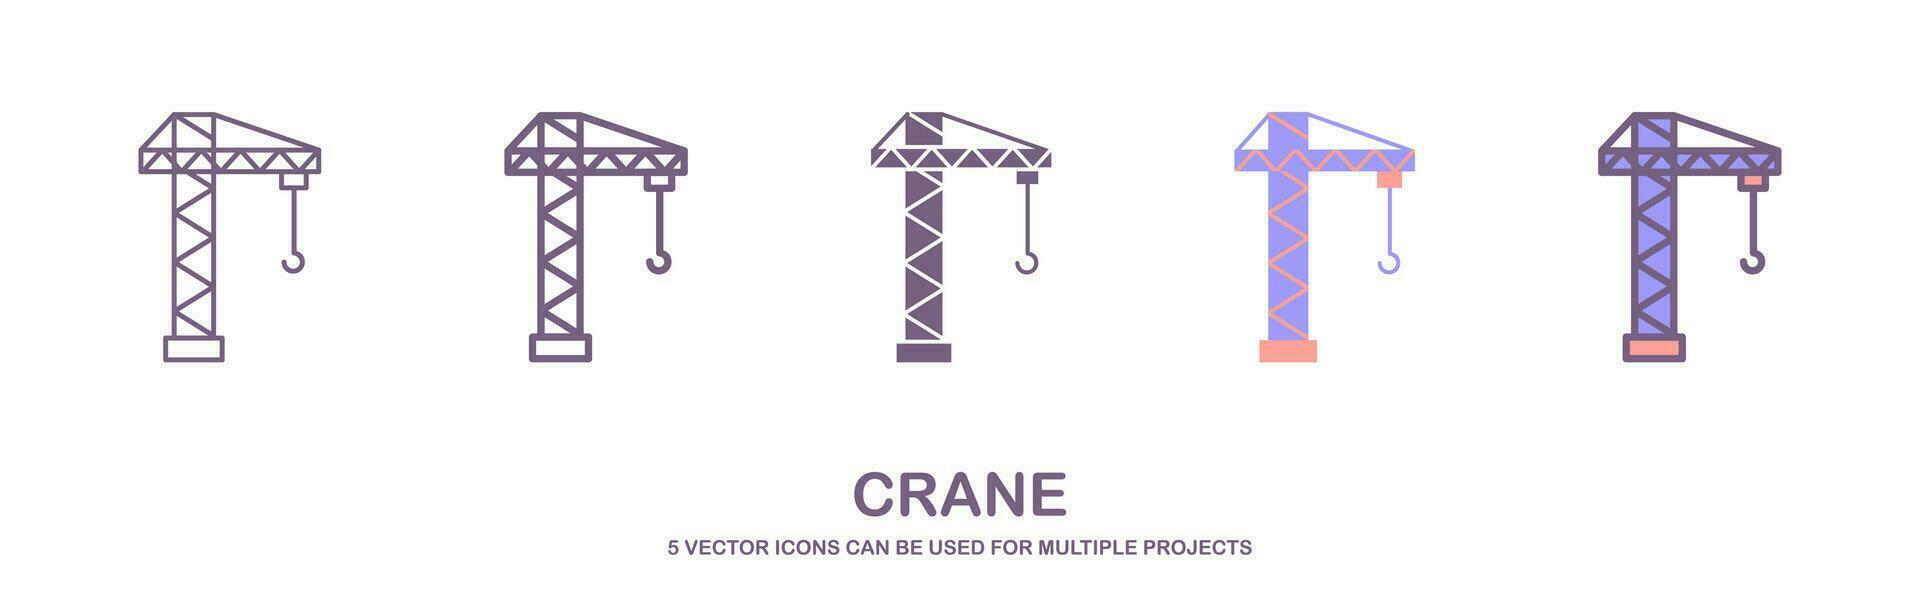 Building, crane, constructing linear icon. Thin line illustration. Tower crane. Contour symbol. Vector isolated outline drawing. Editable stroke